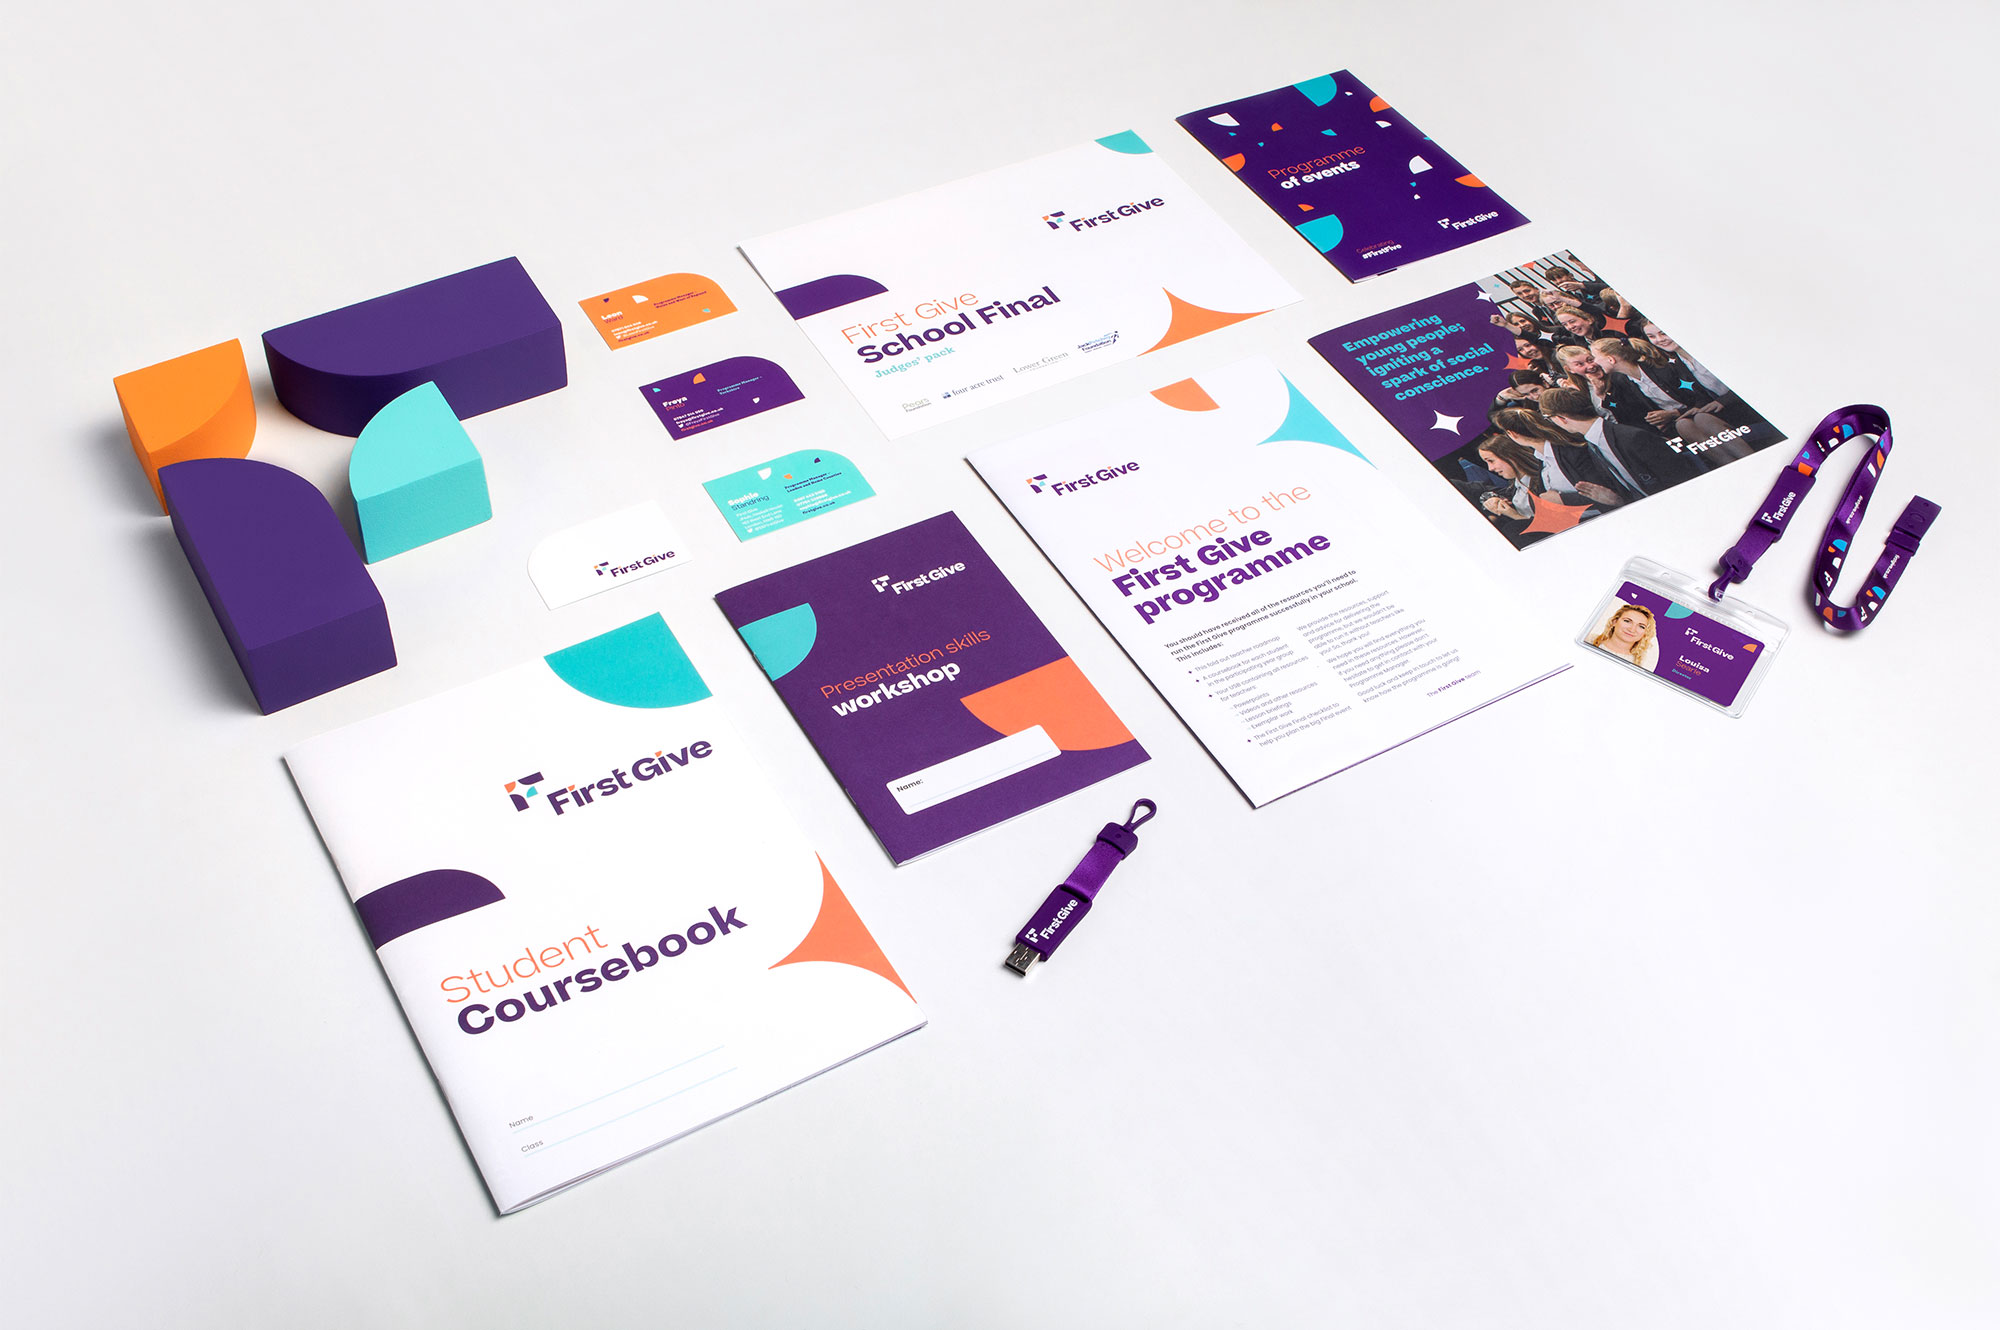 First Give brand materials